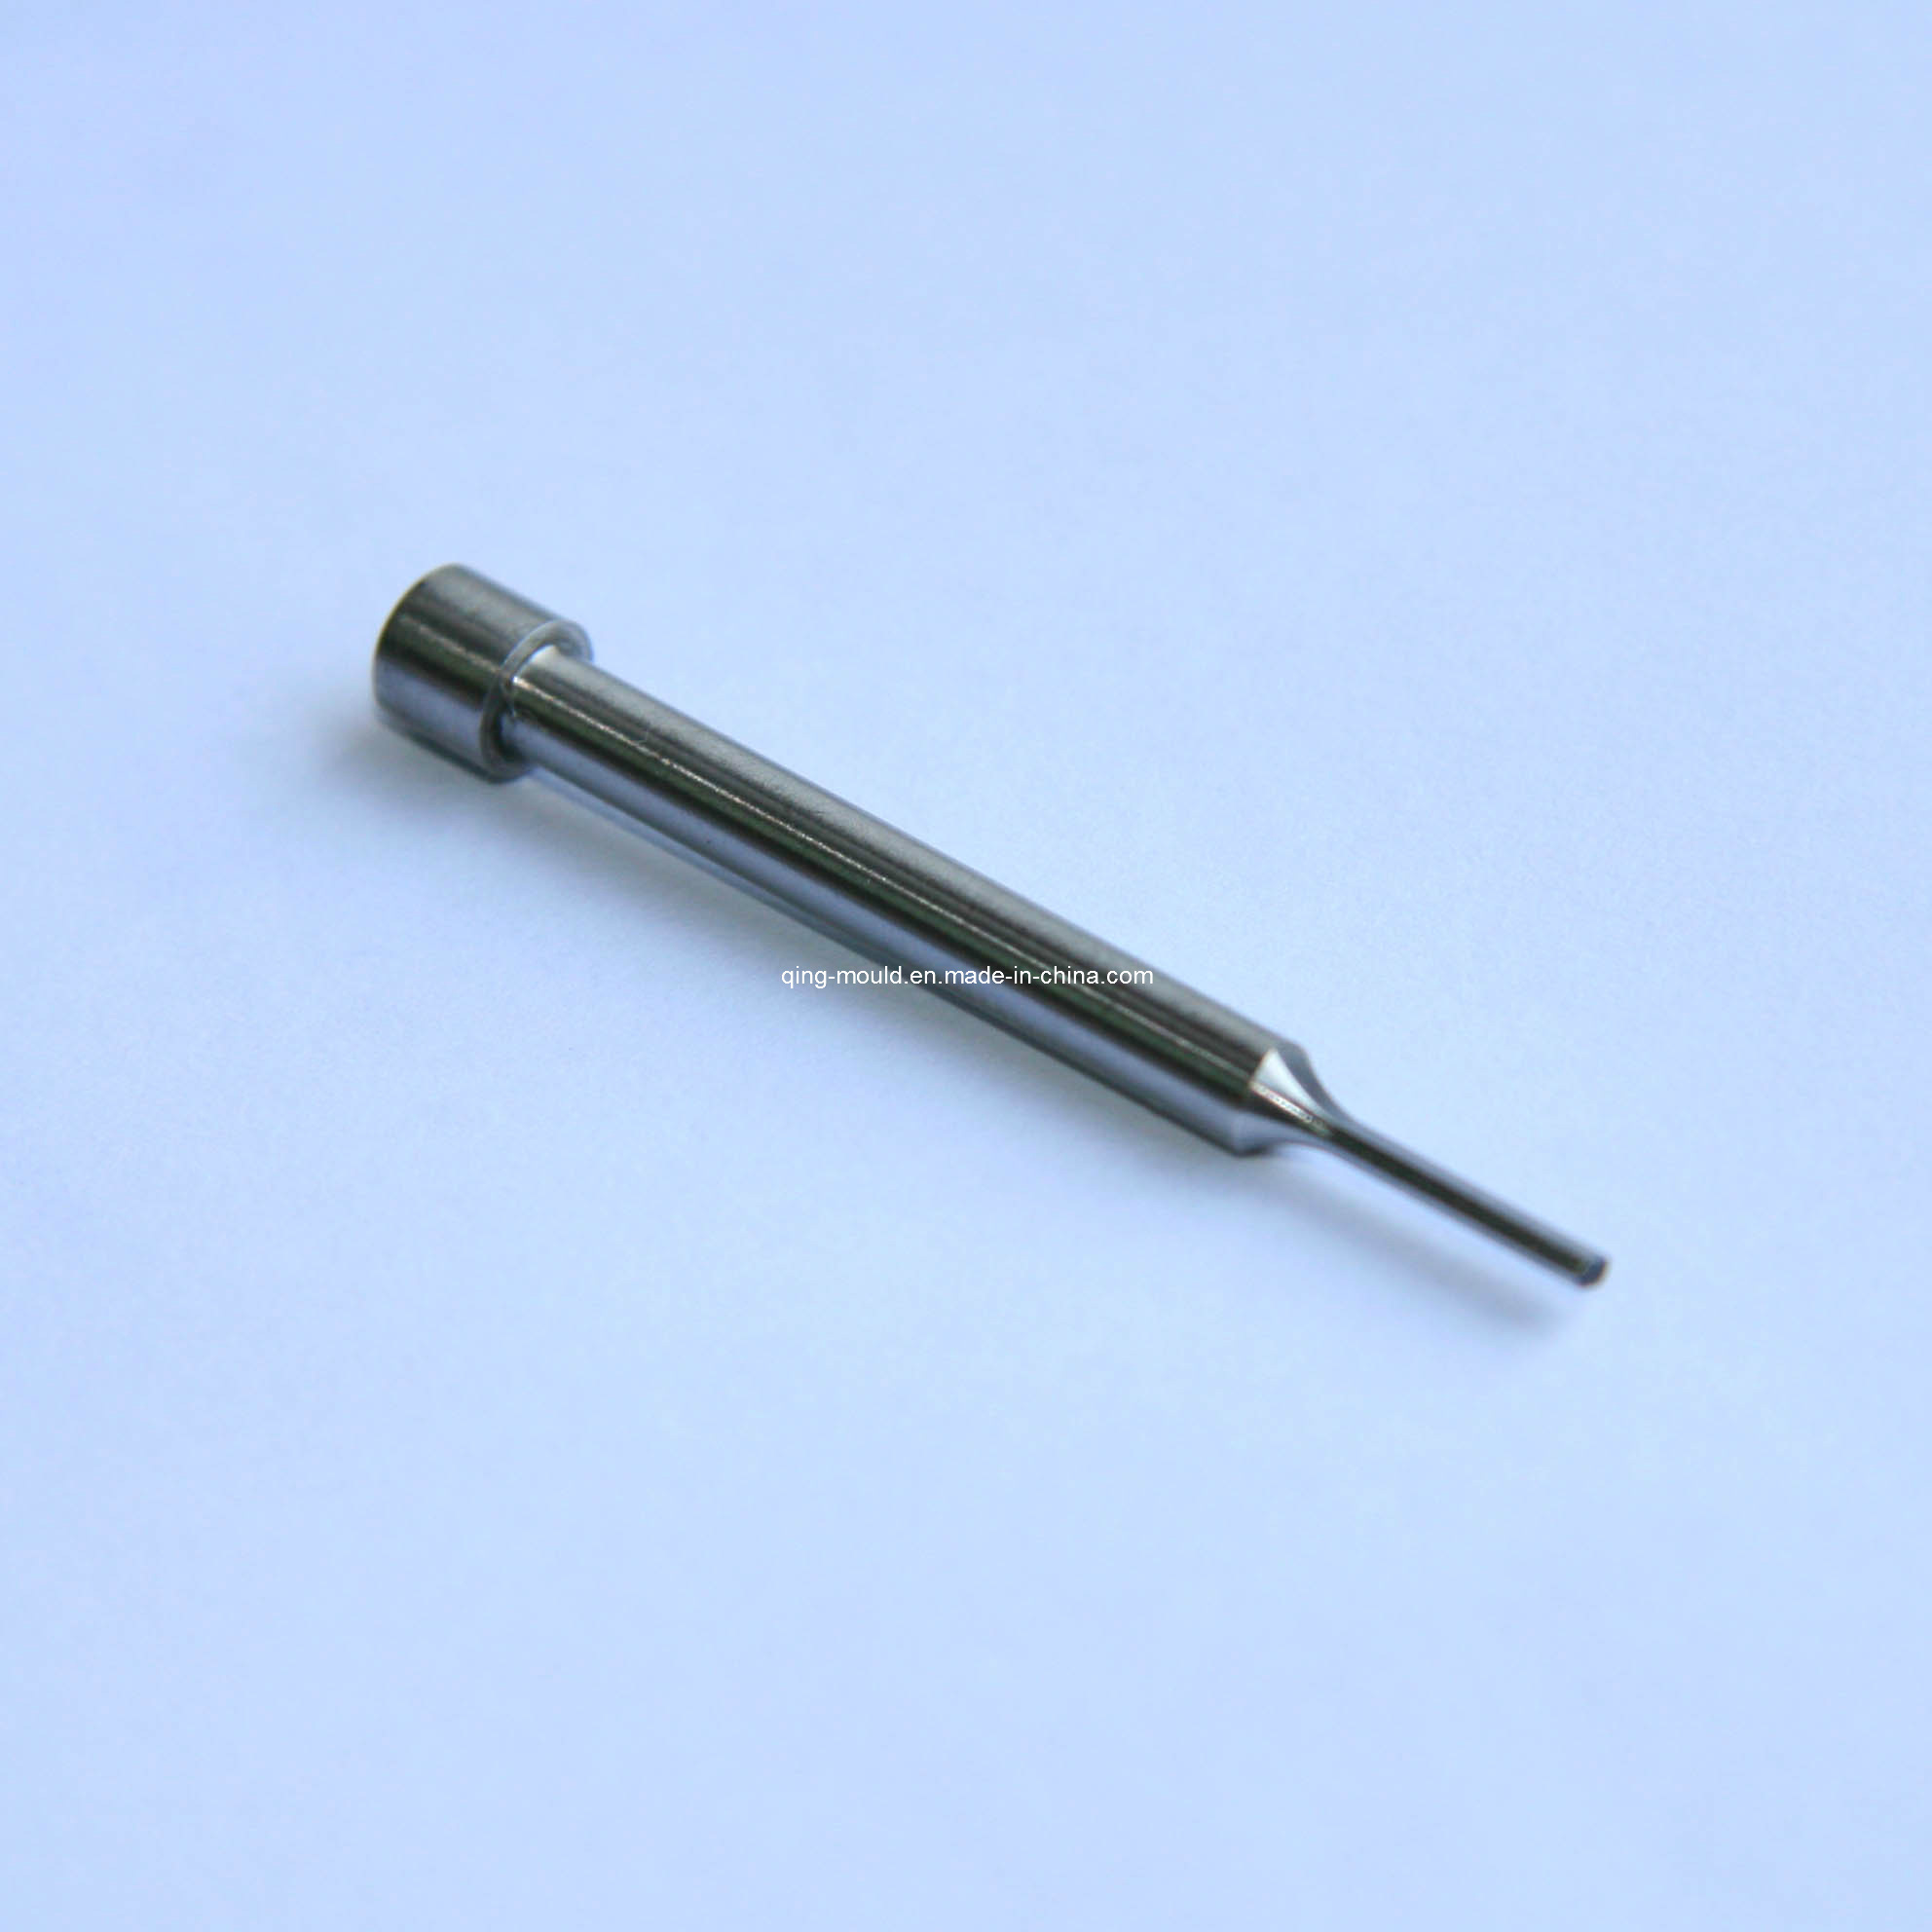 Skh51 Performance Core Pin for Mould Industry